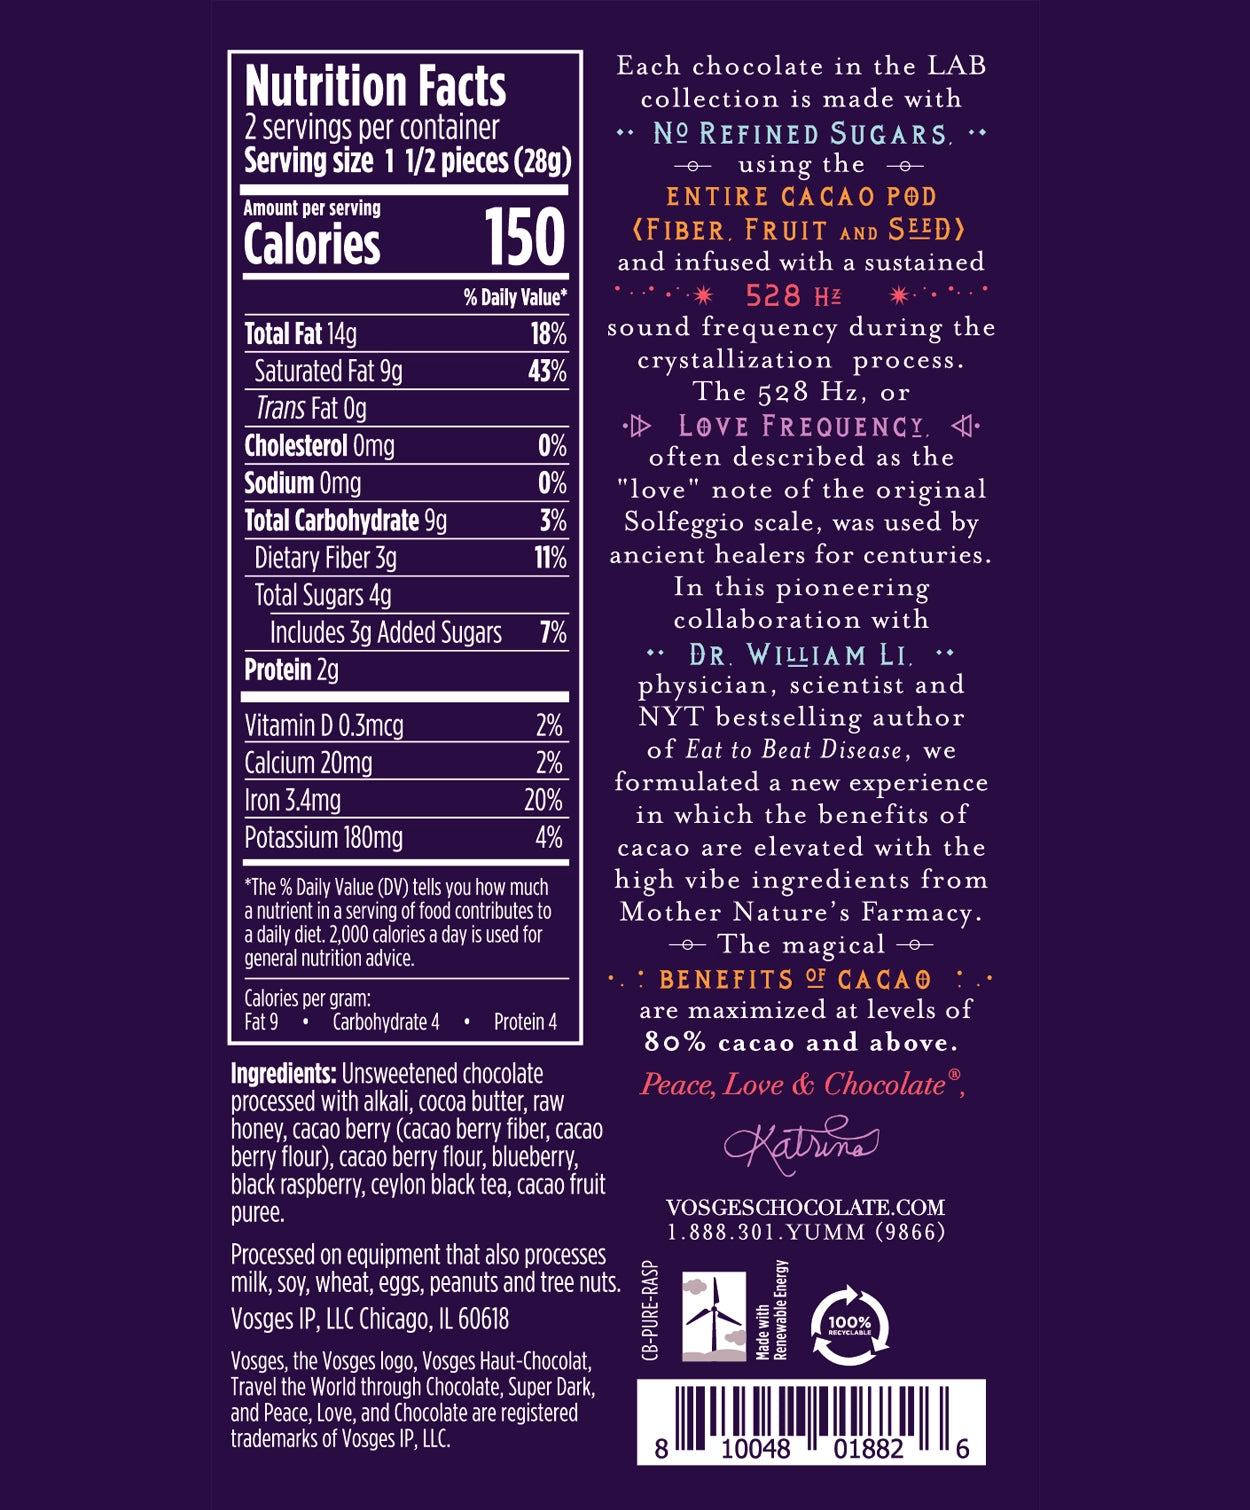 Nutrition Facts and Ingredients of Vosges Haut-Chocolat Black Raspberry with Fermented Black Tea Pure Plant bar in white, san-serif font on a dark purple background. 